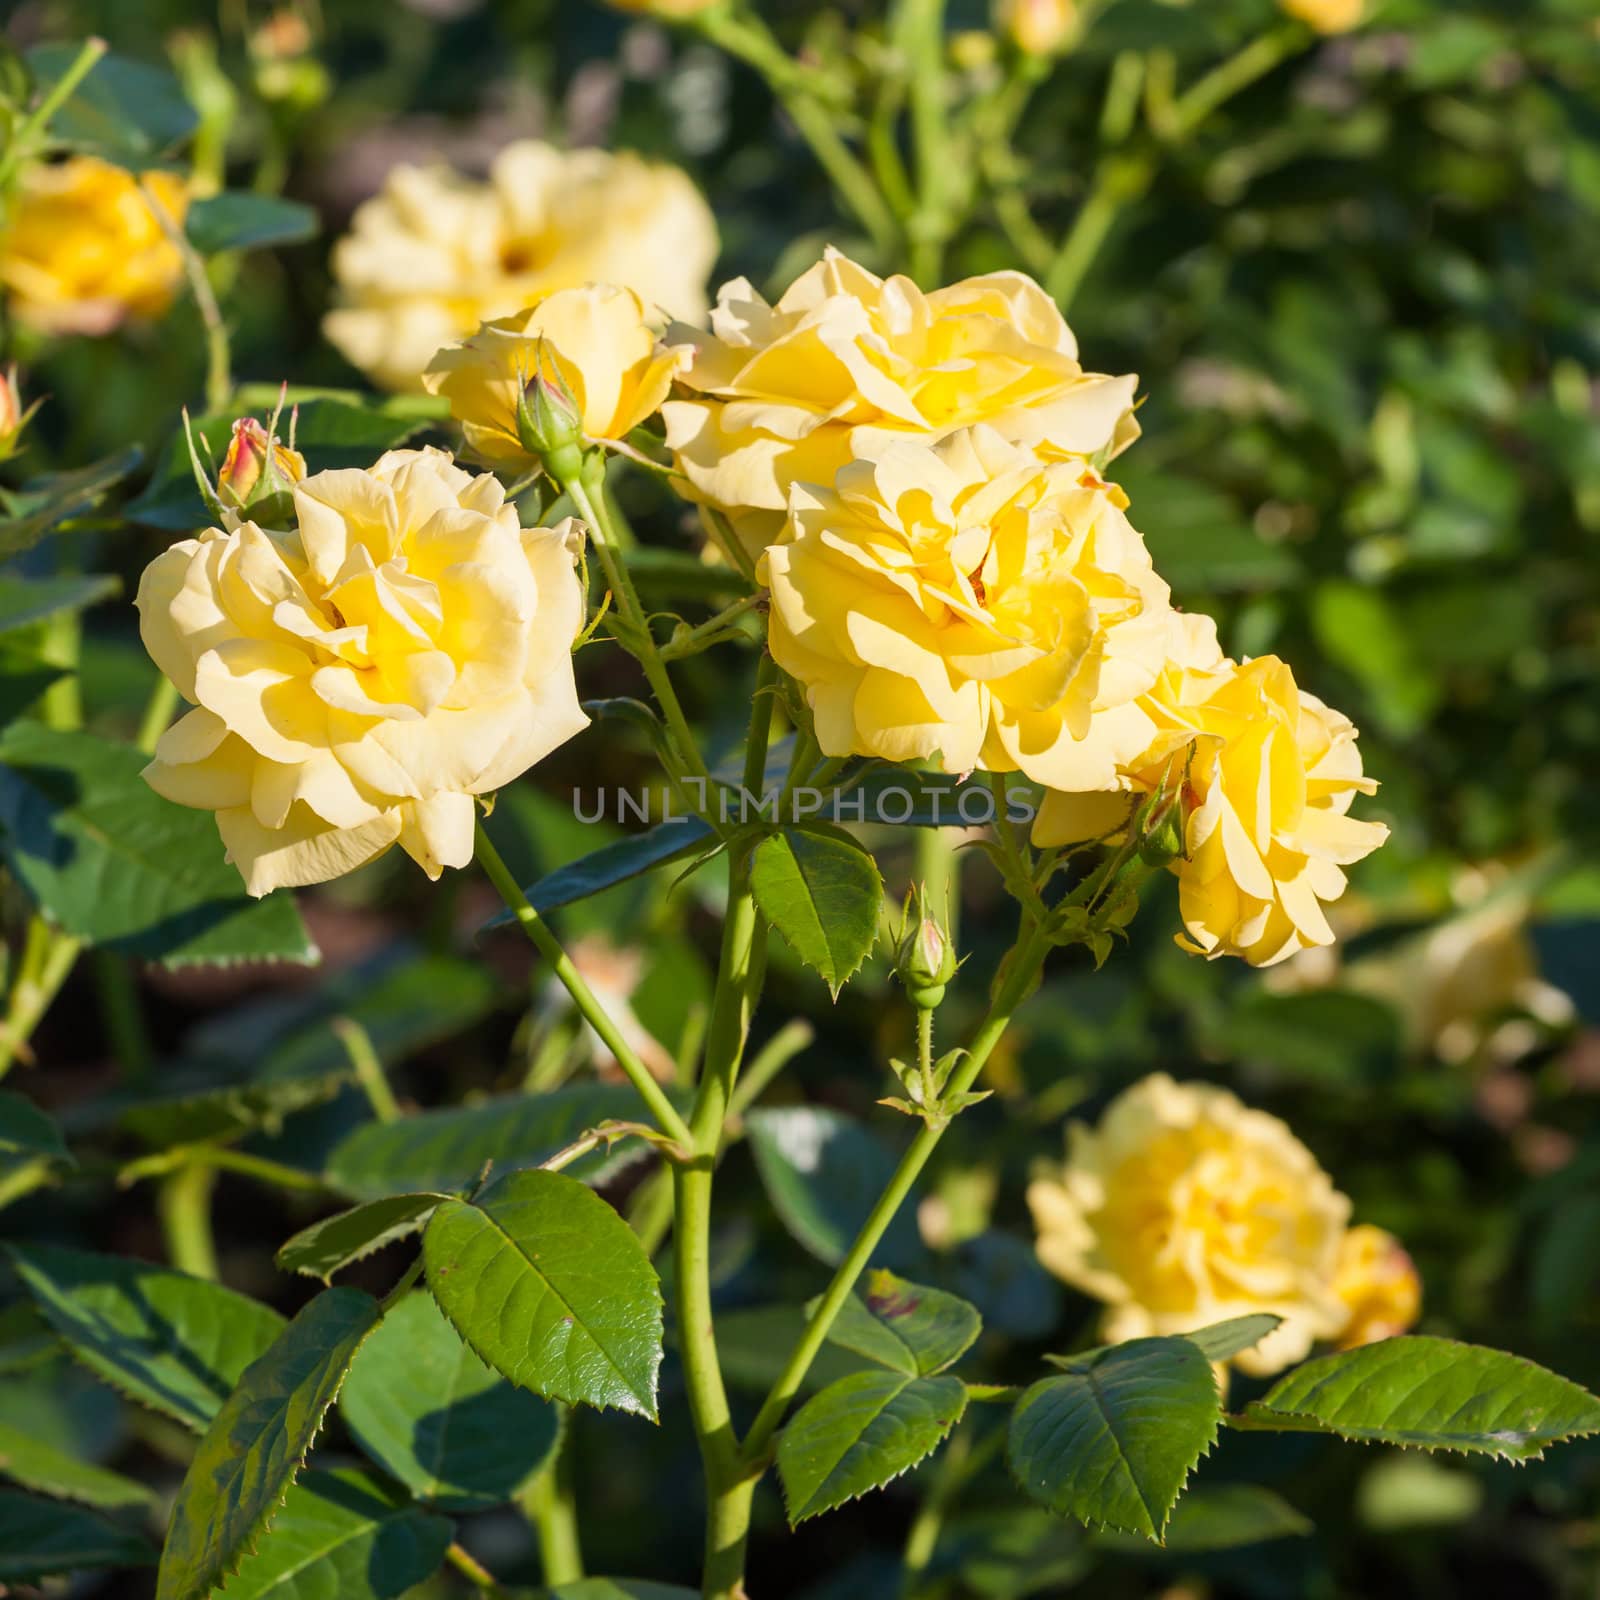 Yellow roses on the Branch in the Garden